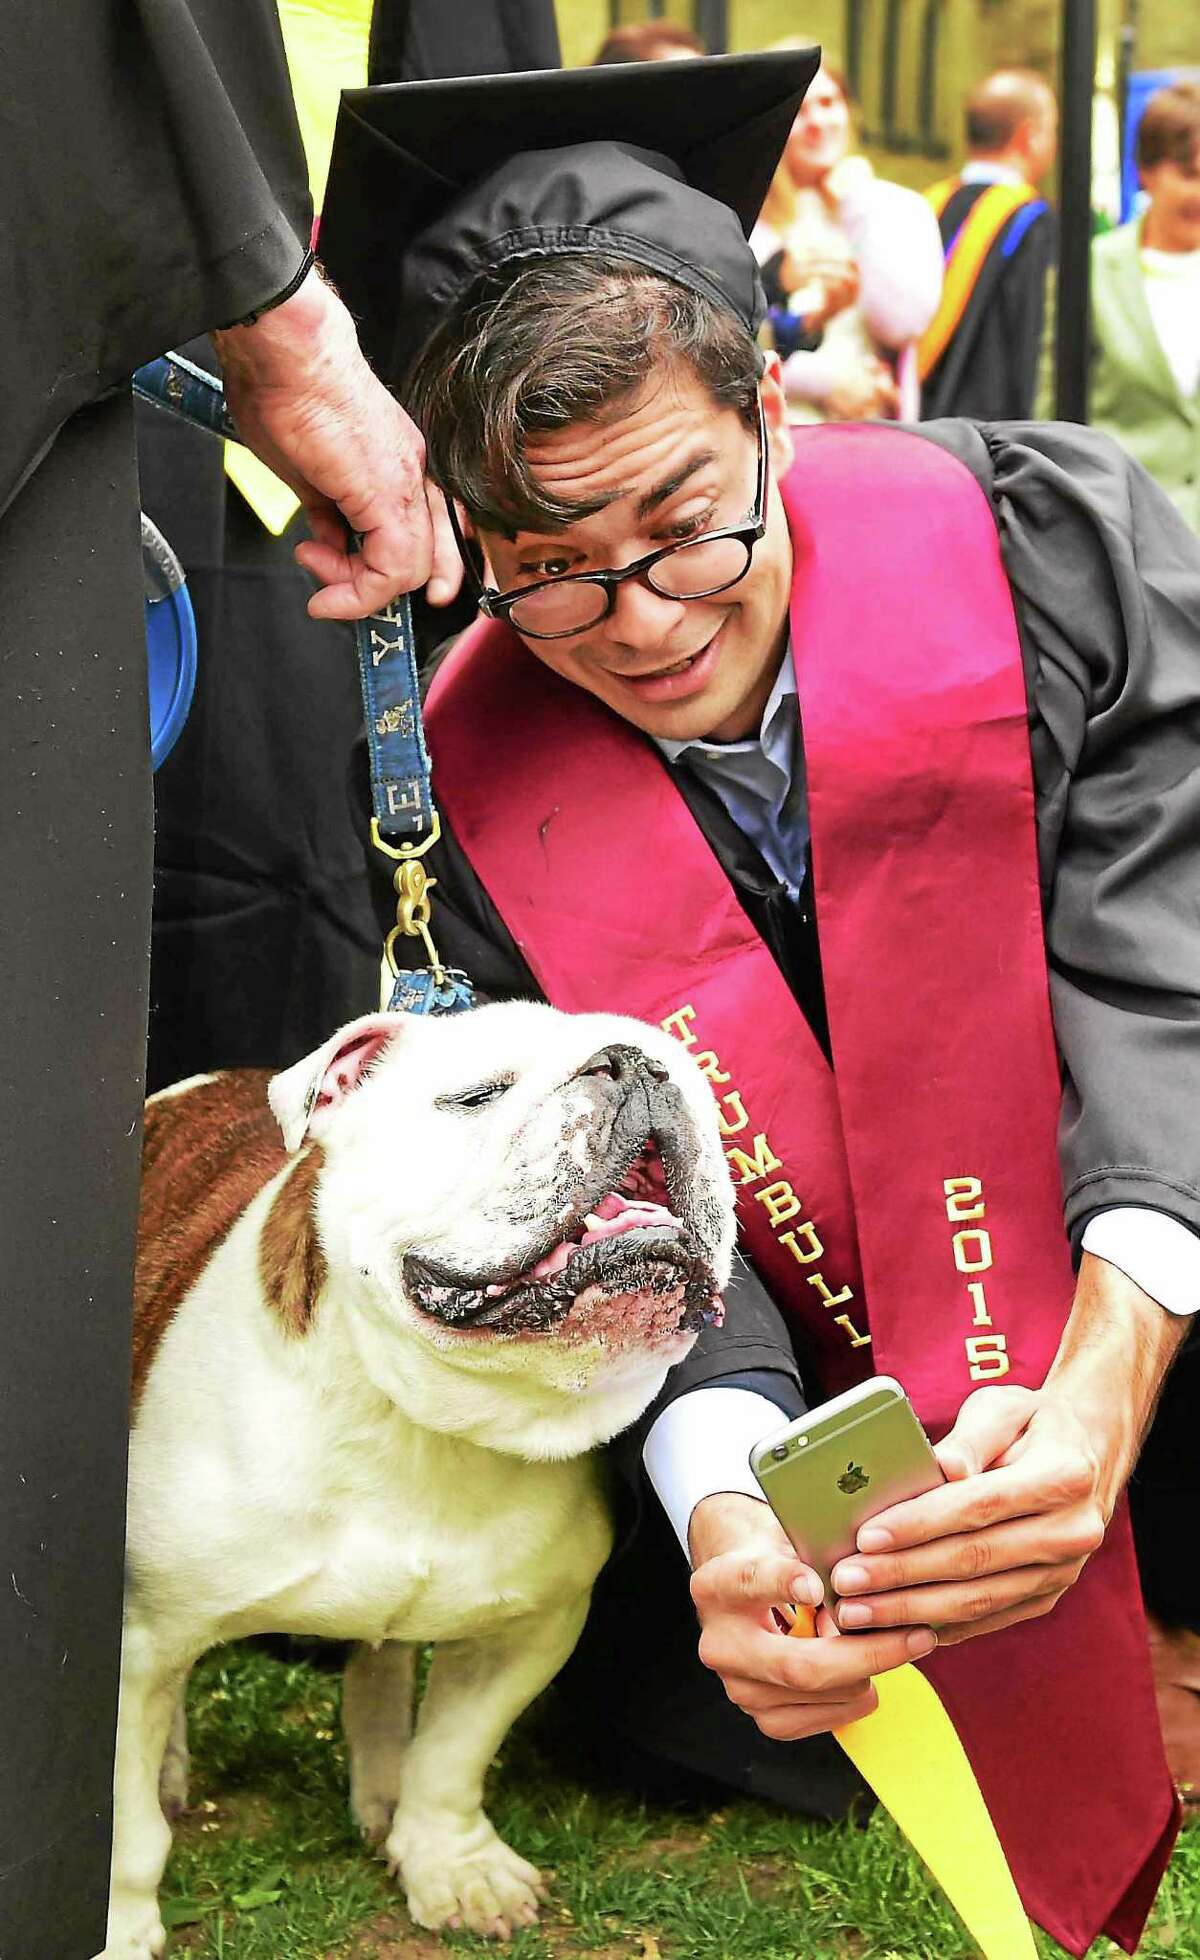 Alexander Saedy of Detroit and Yale’s Trumbull College takes a selfie photo on his iPhone with the Yale bulldog mascot “Sherman” during commencement Monday.